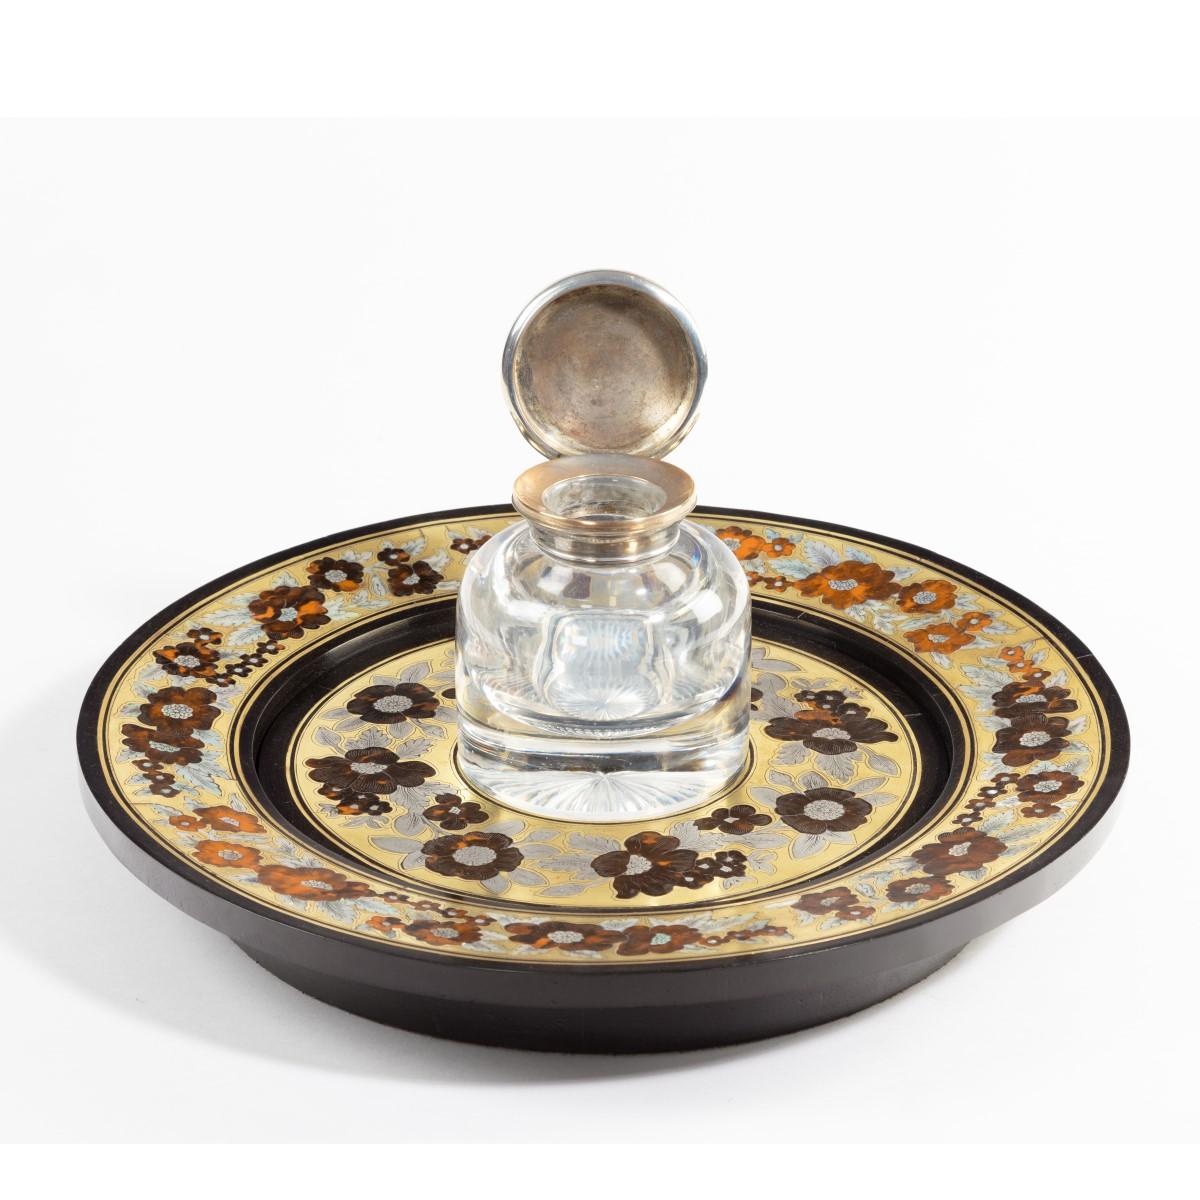 Mid-19th Century Early Victorian Boulle-Work and Ebony Inkstand after George Bullock For Sale